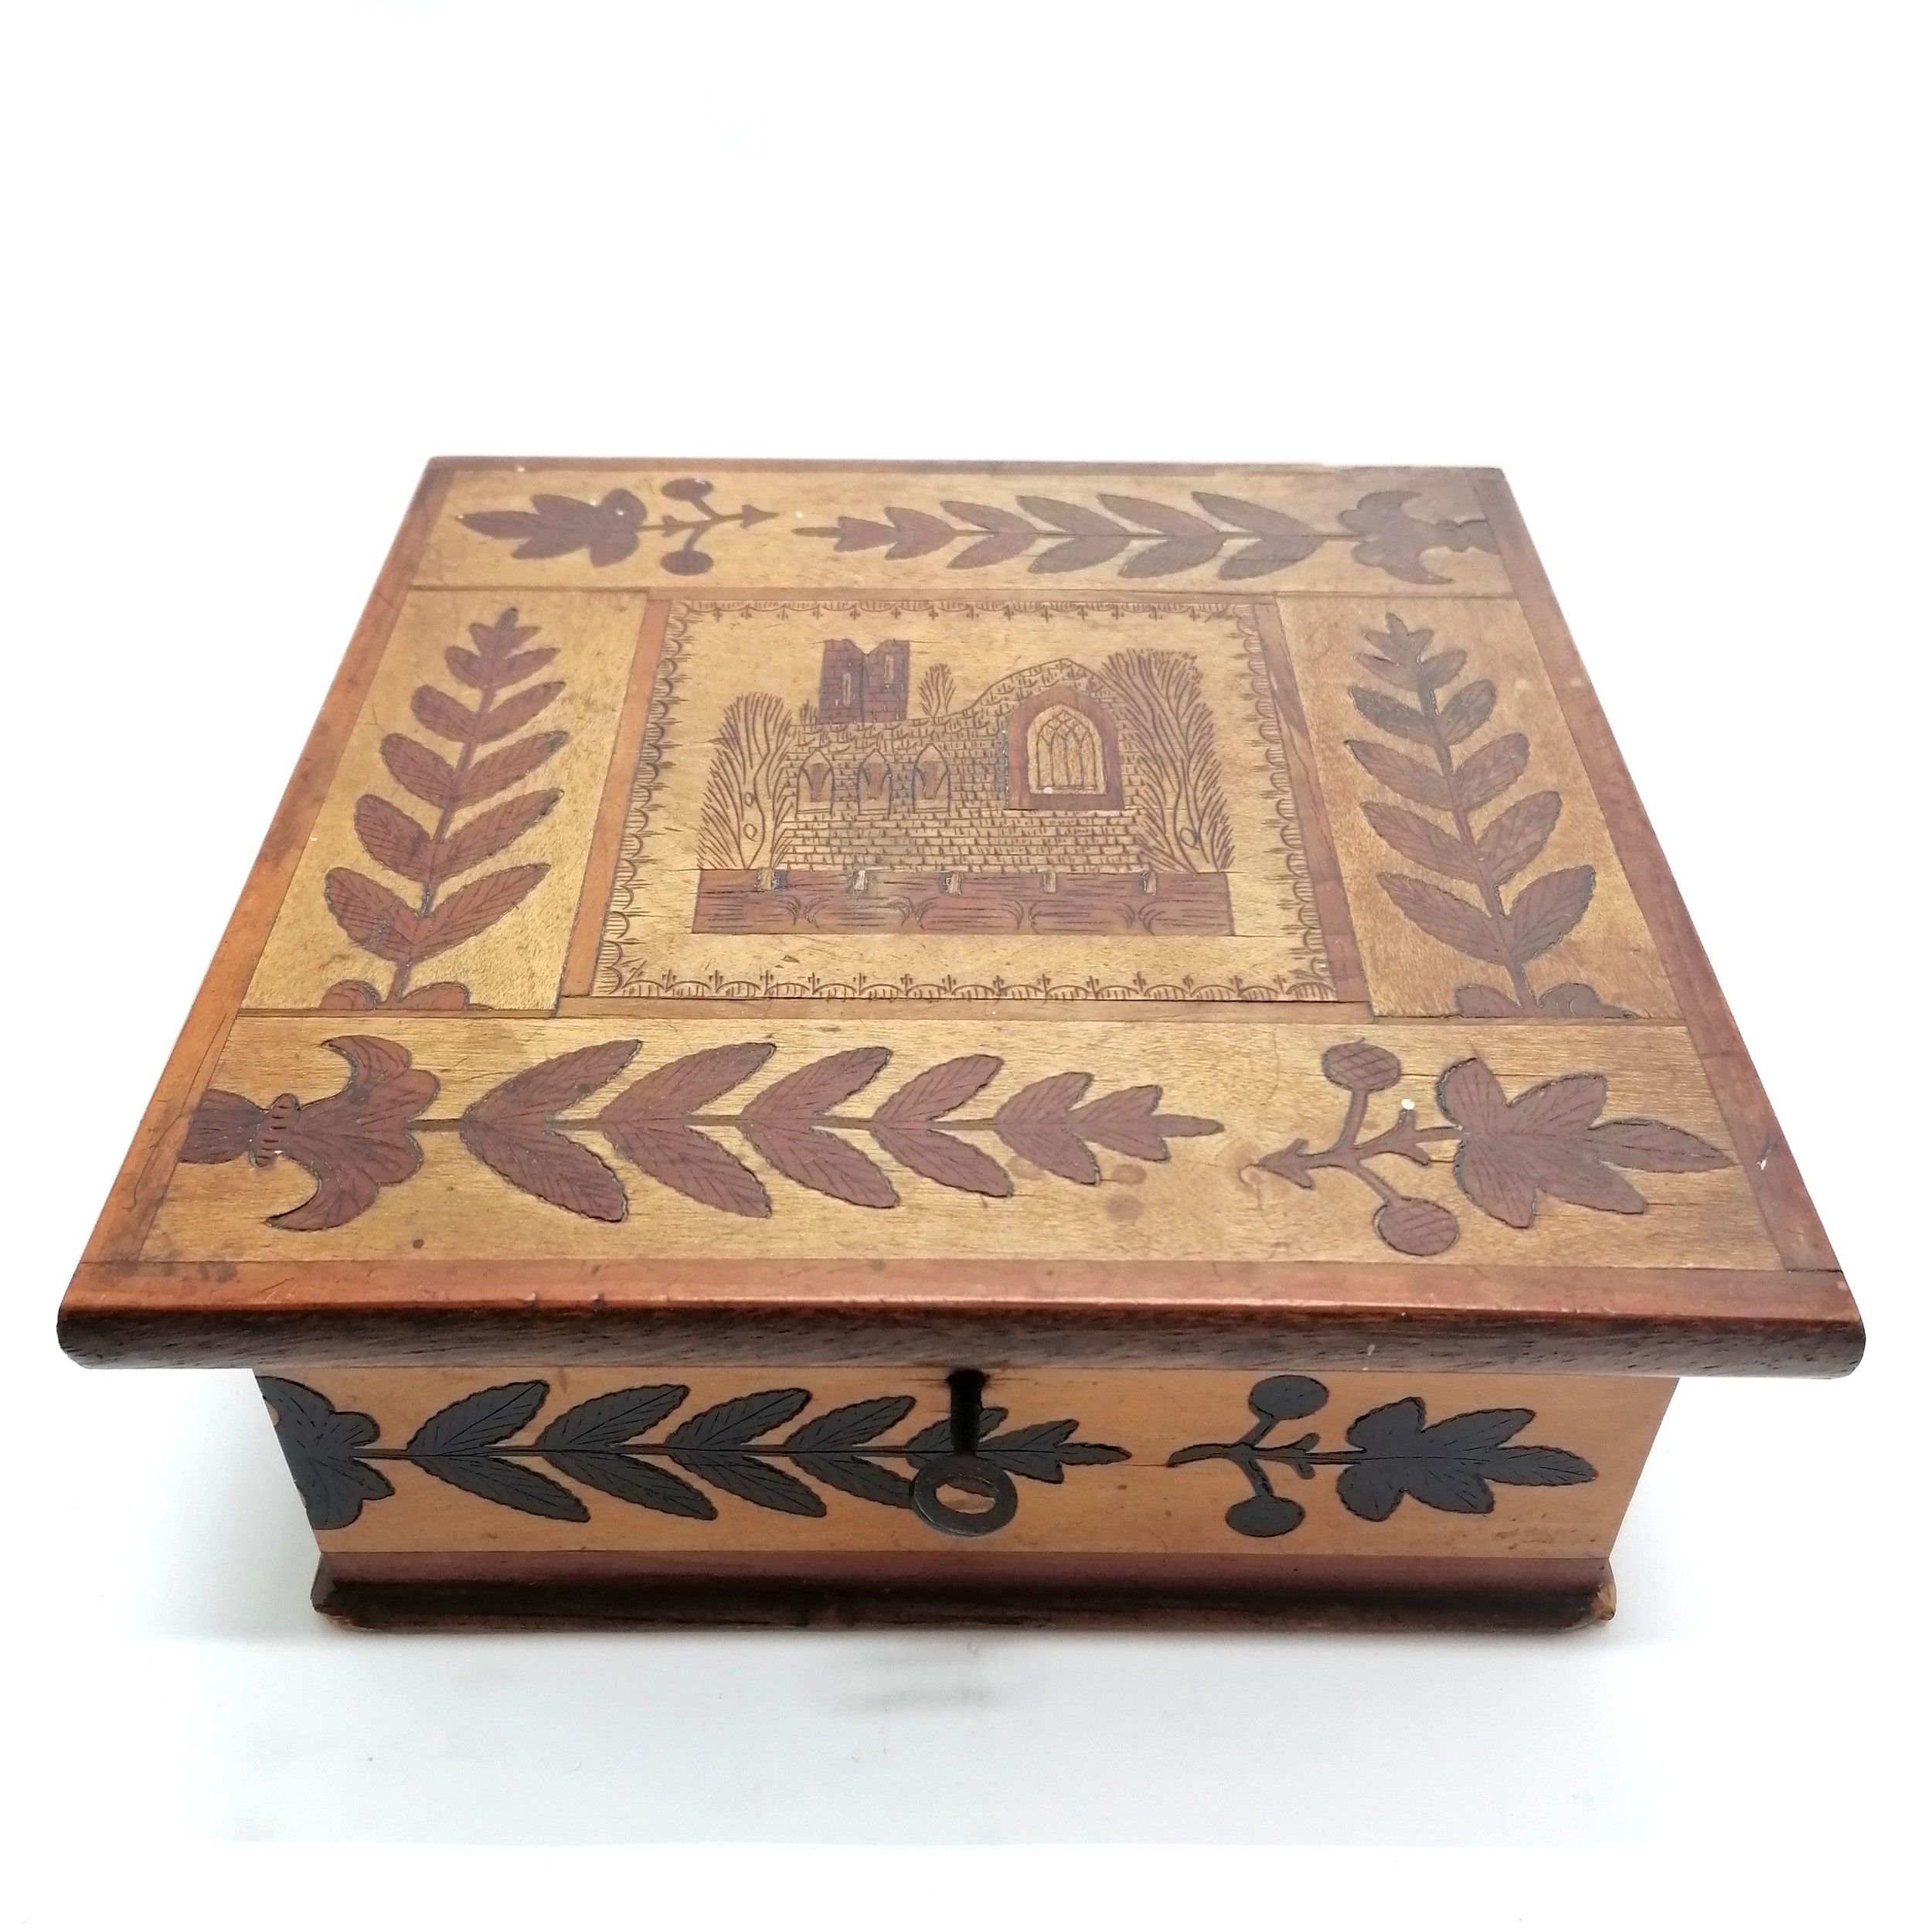 Antique Irish Killarney ware box with parquetry detail of an abbey / church with oak leaf detail and